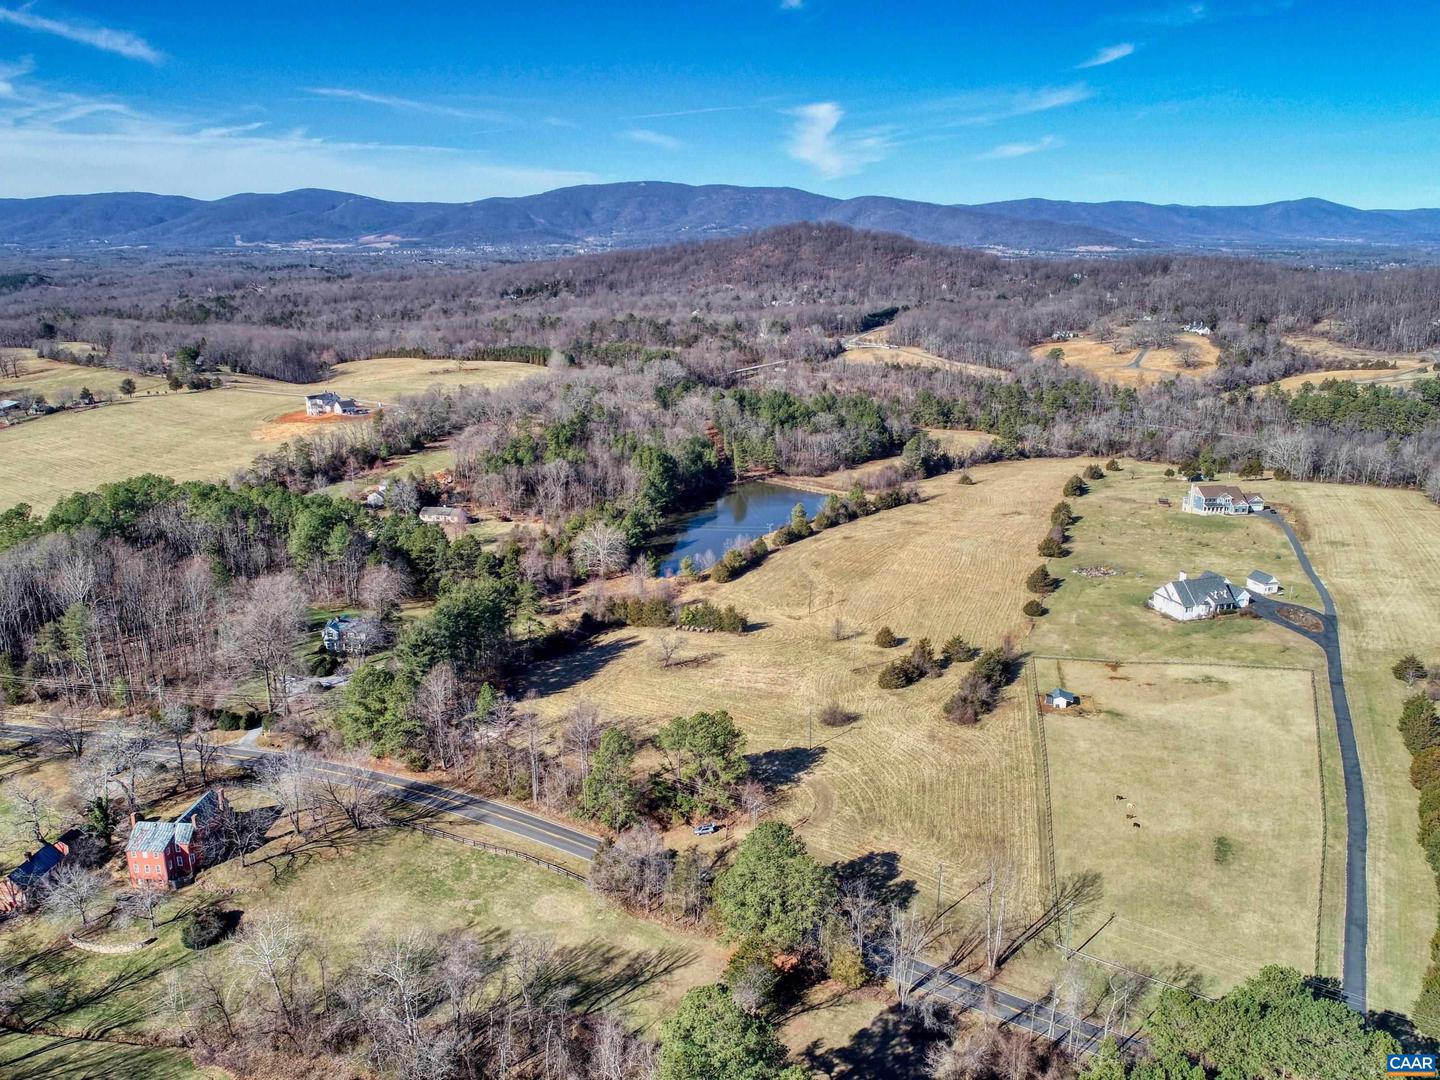 4020 DICK WOODS RD, CHARLOTTESVILLE, Virginia 22903, ,Land,For sale,4020 DICK WOODS RD,648341 MLS # 648341